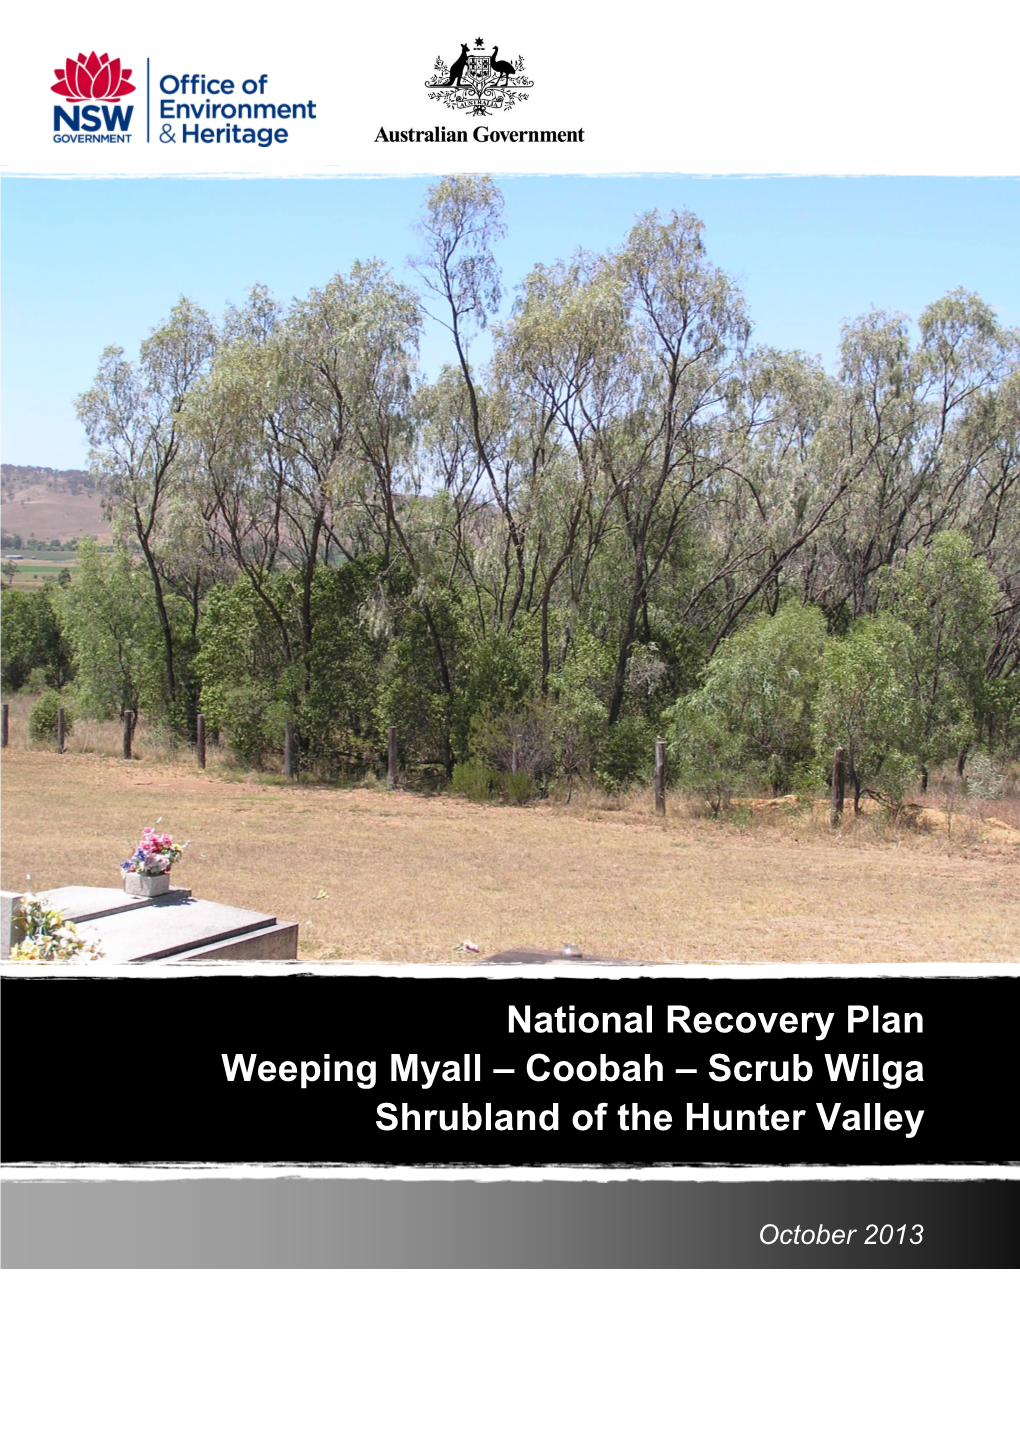 National Recovery Plan Weeping Myall – Coobah – Scrub Wilga Shrubland of the Hunter Valley